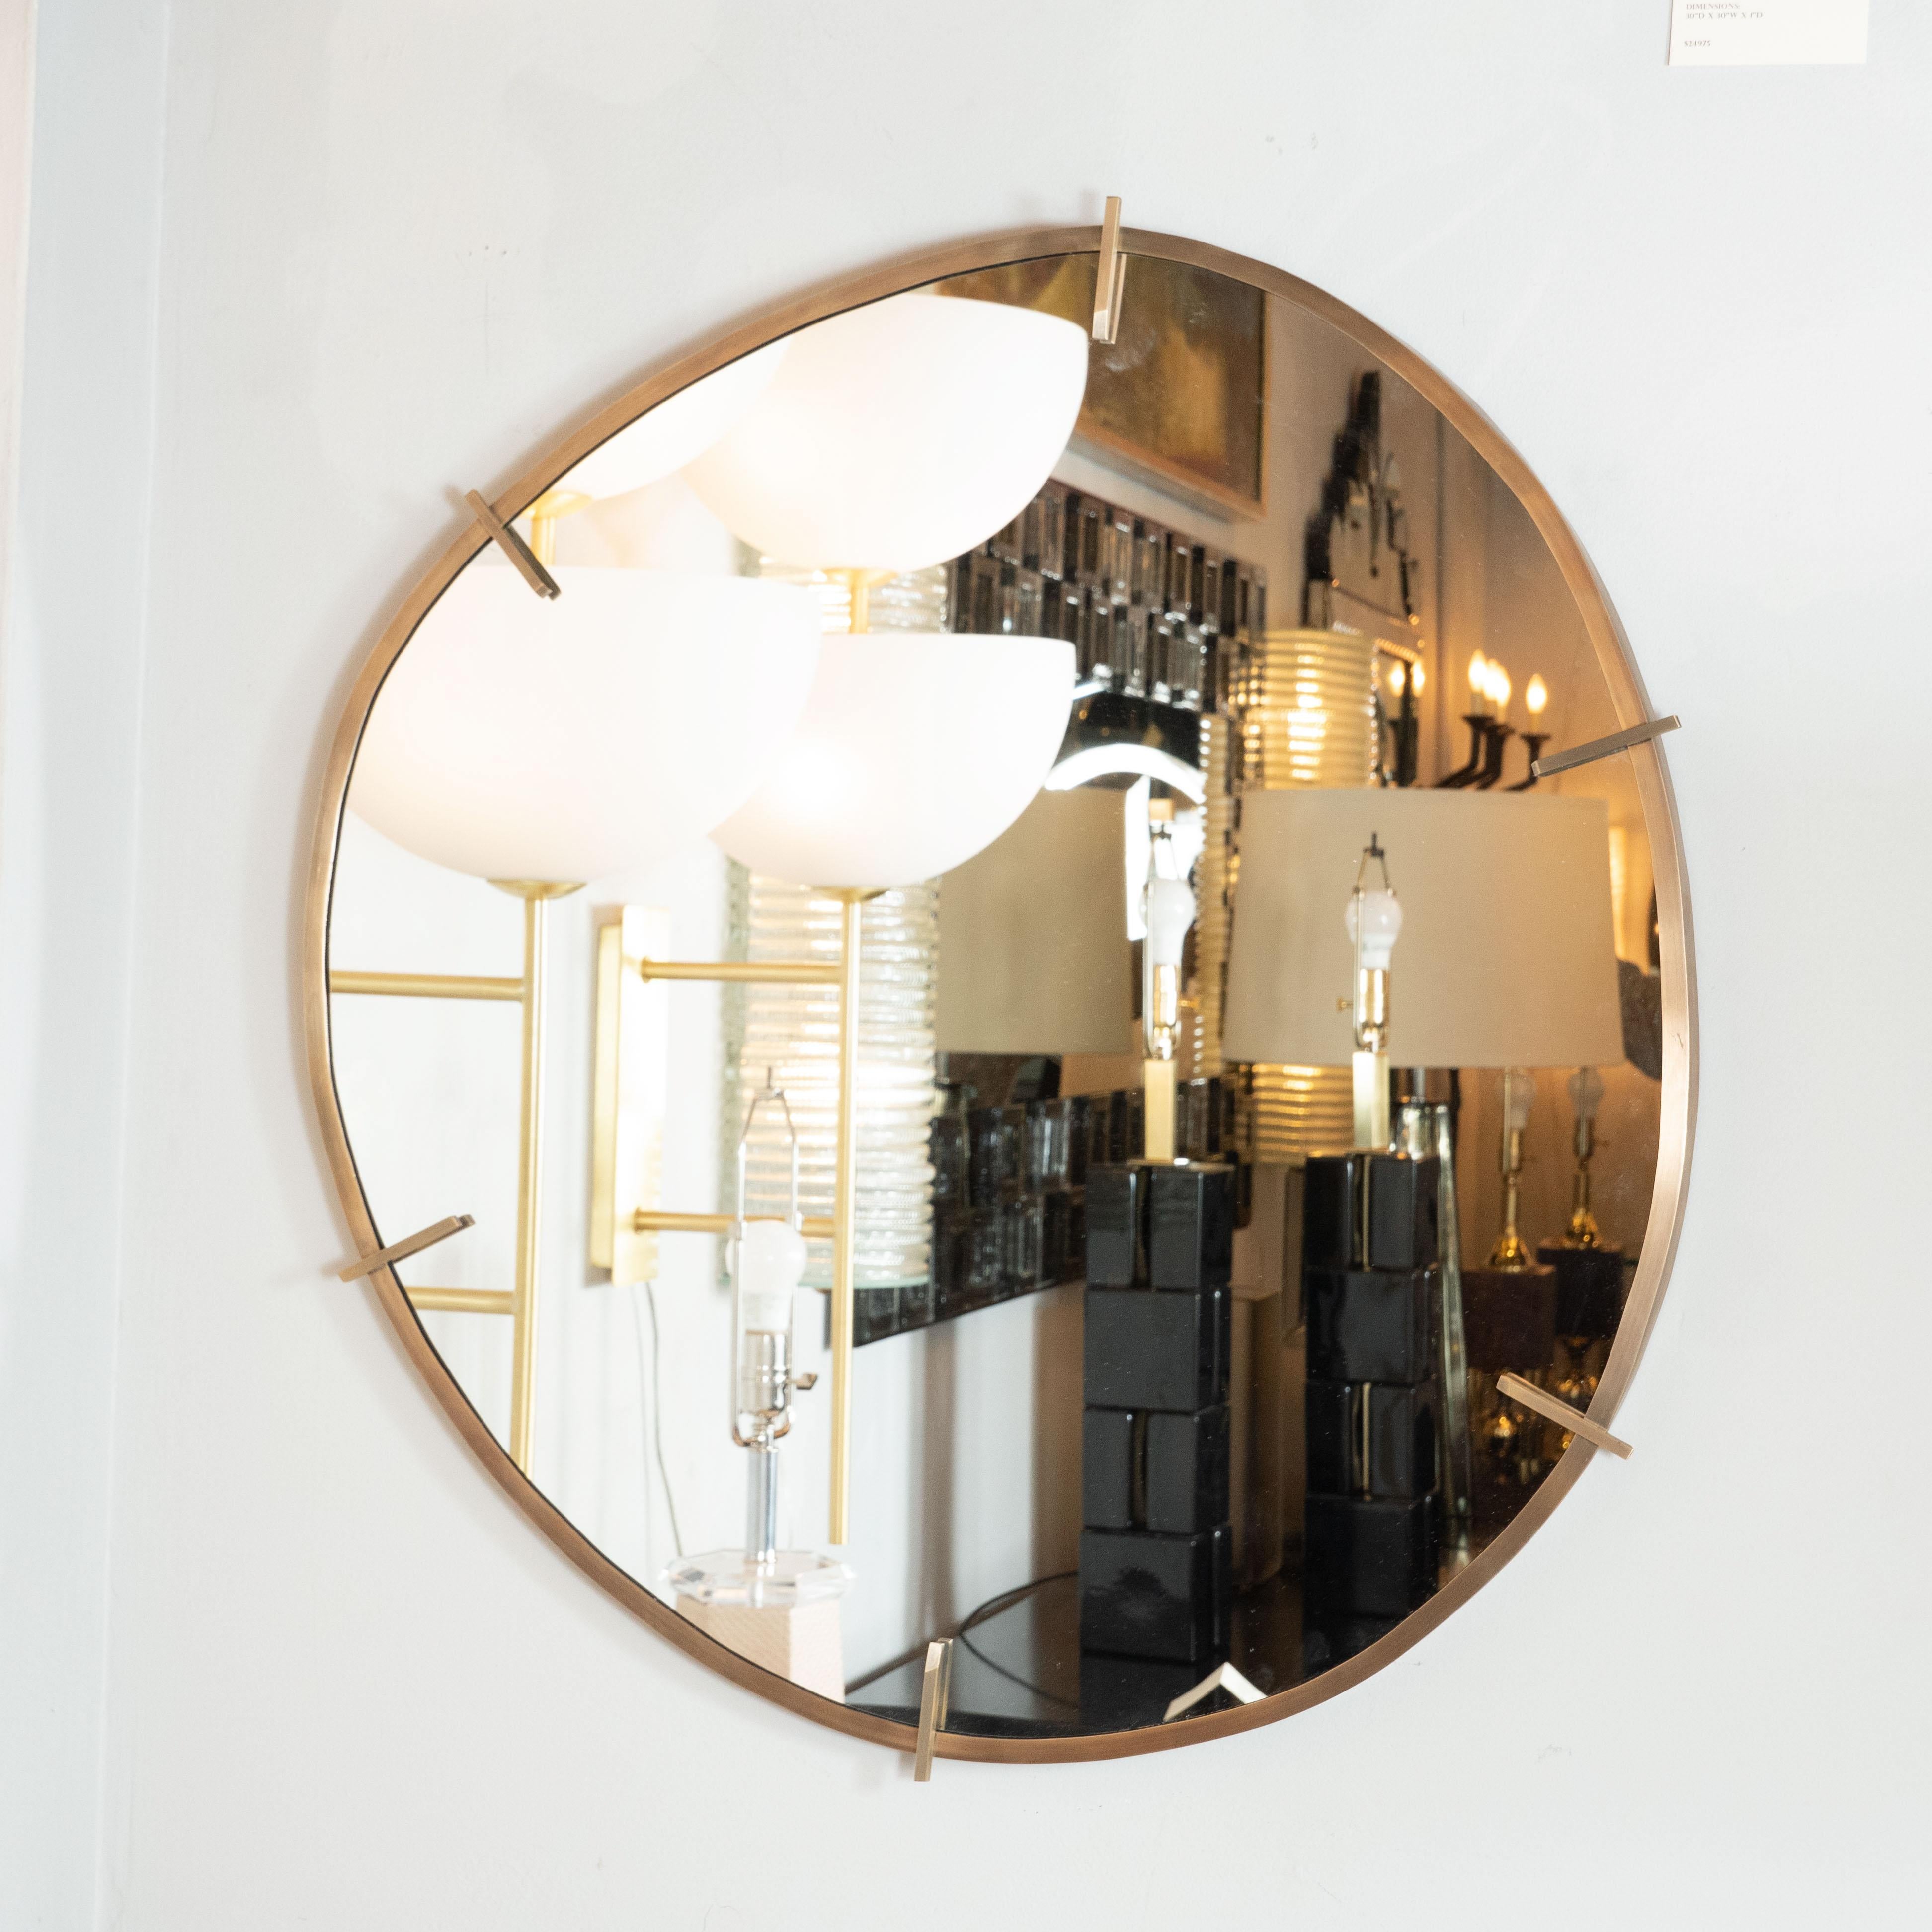 Handmade by our exclusive atelier, this refined mirror represents one of the few contemporary pieces that we carry, and for good reason. It embodies the old-world craftsmanship and lines of Mid-Century Modernist design that we treasure. It is an